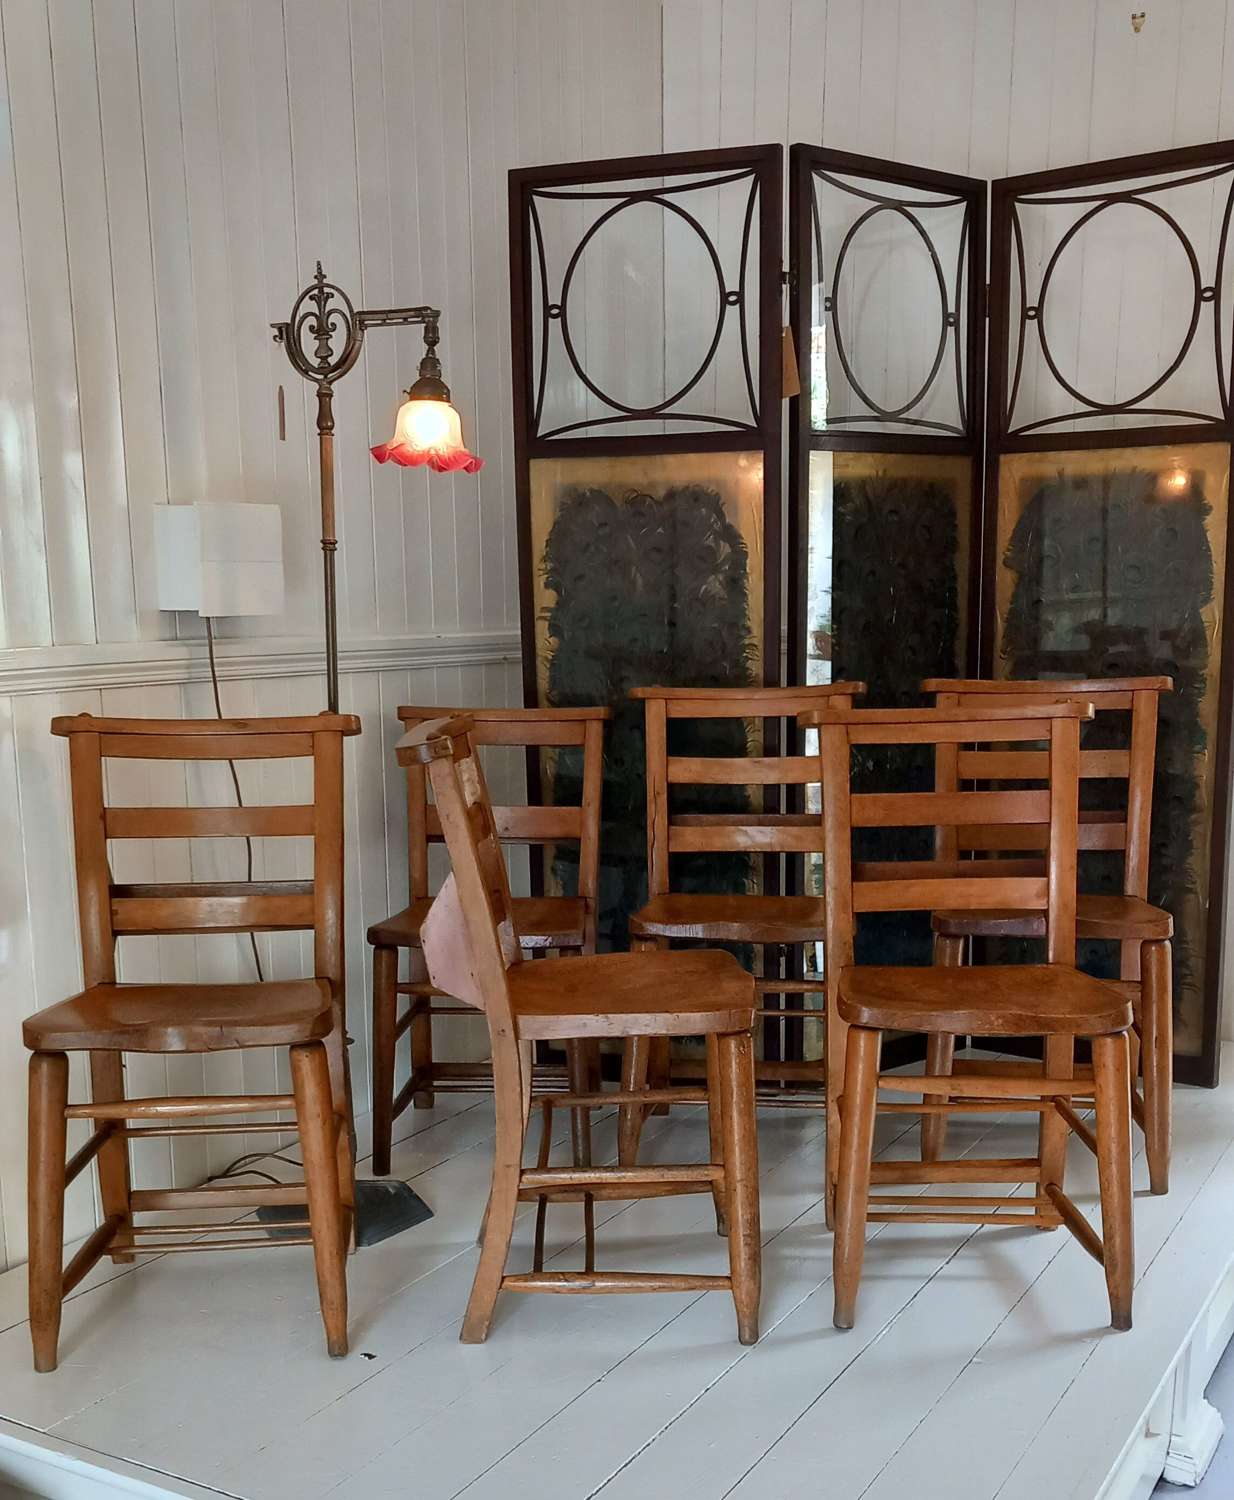 Early 20th century Chapel chairs